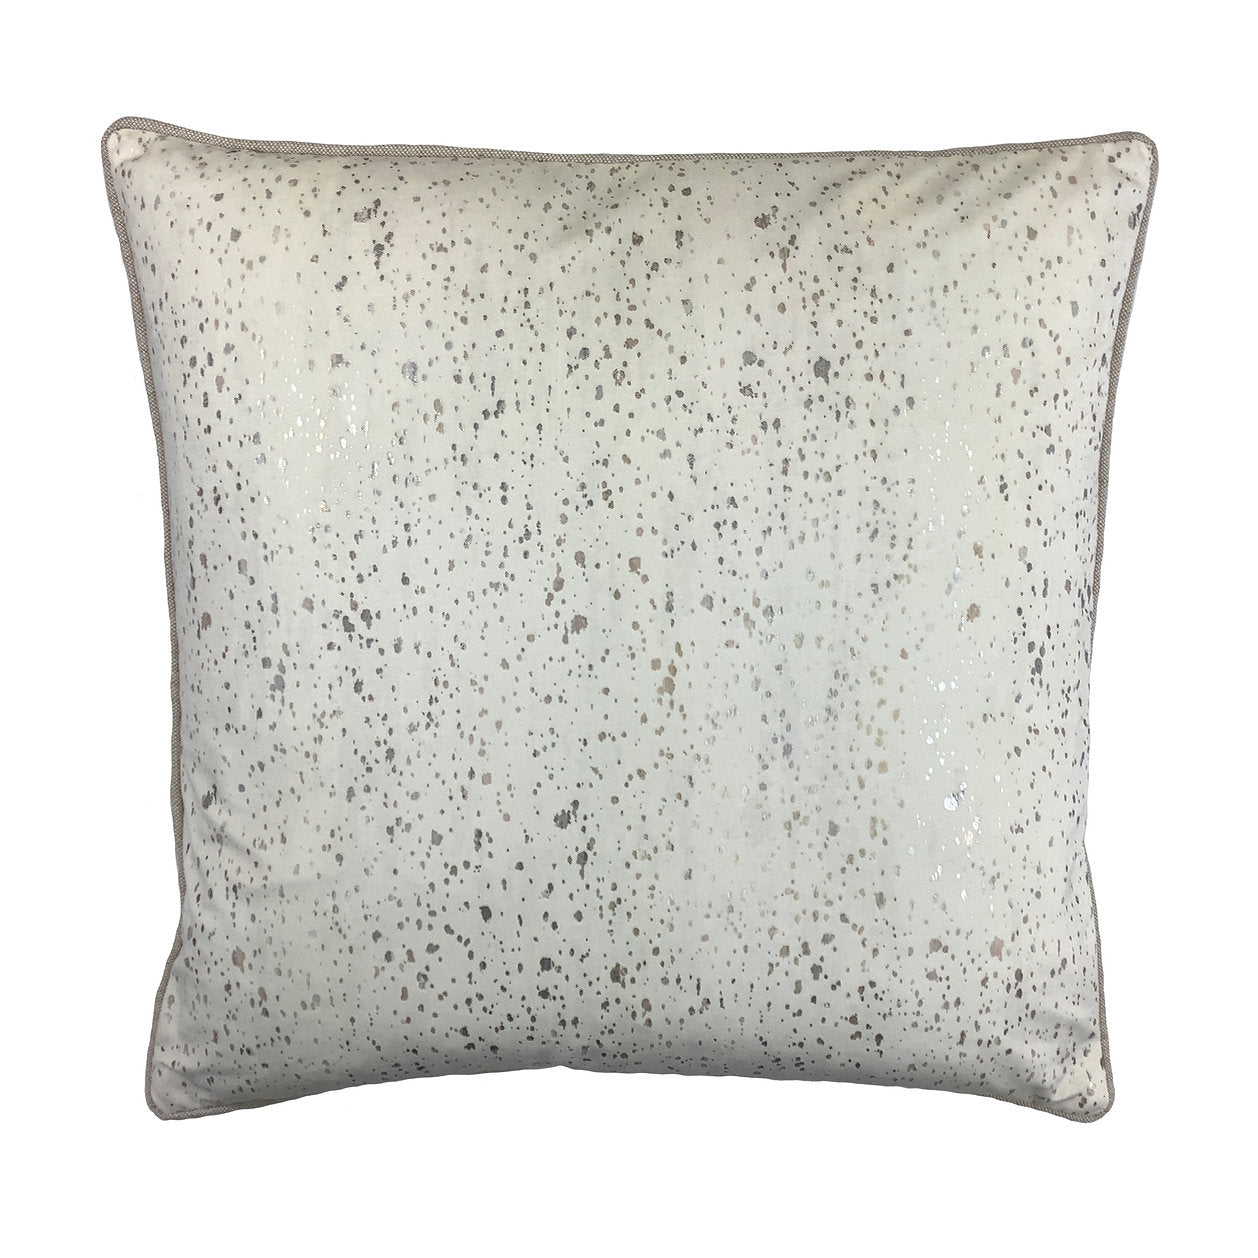 ANTHEM PILLOW SILVER SPOTTED  (Available in 2 sizes)